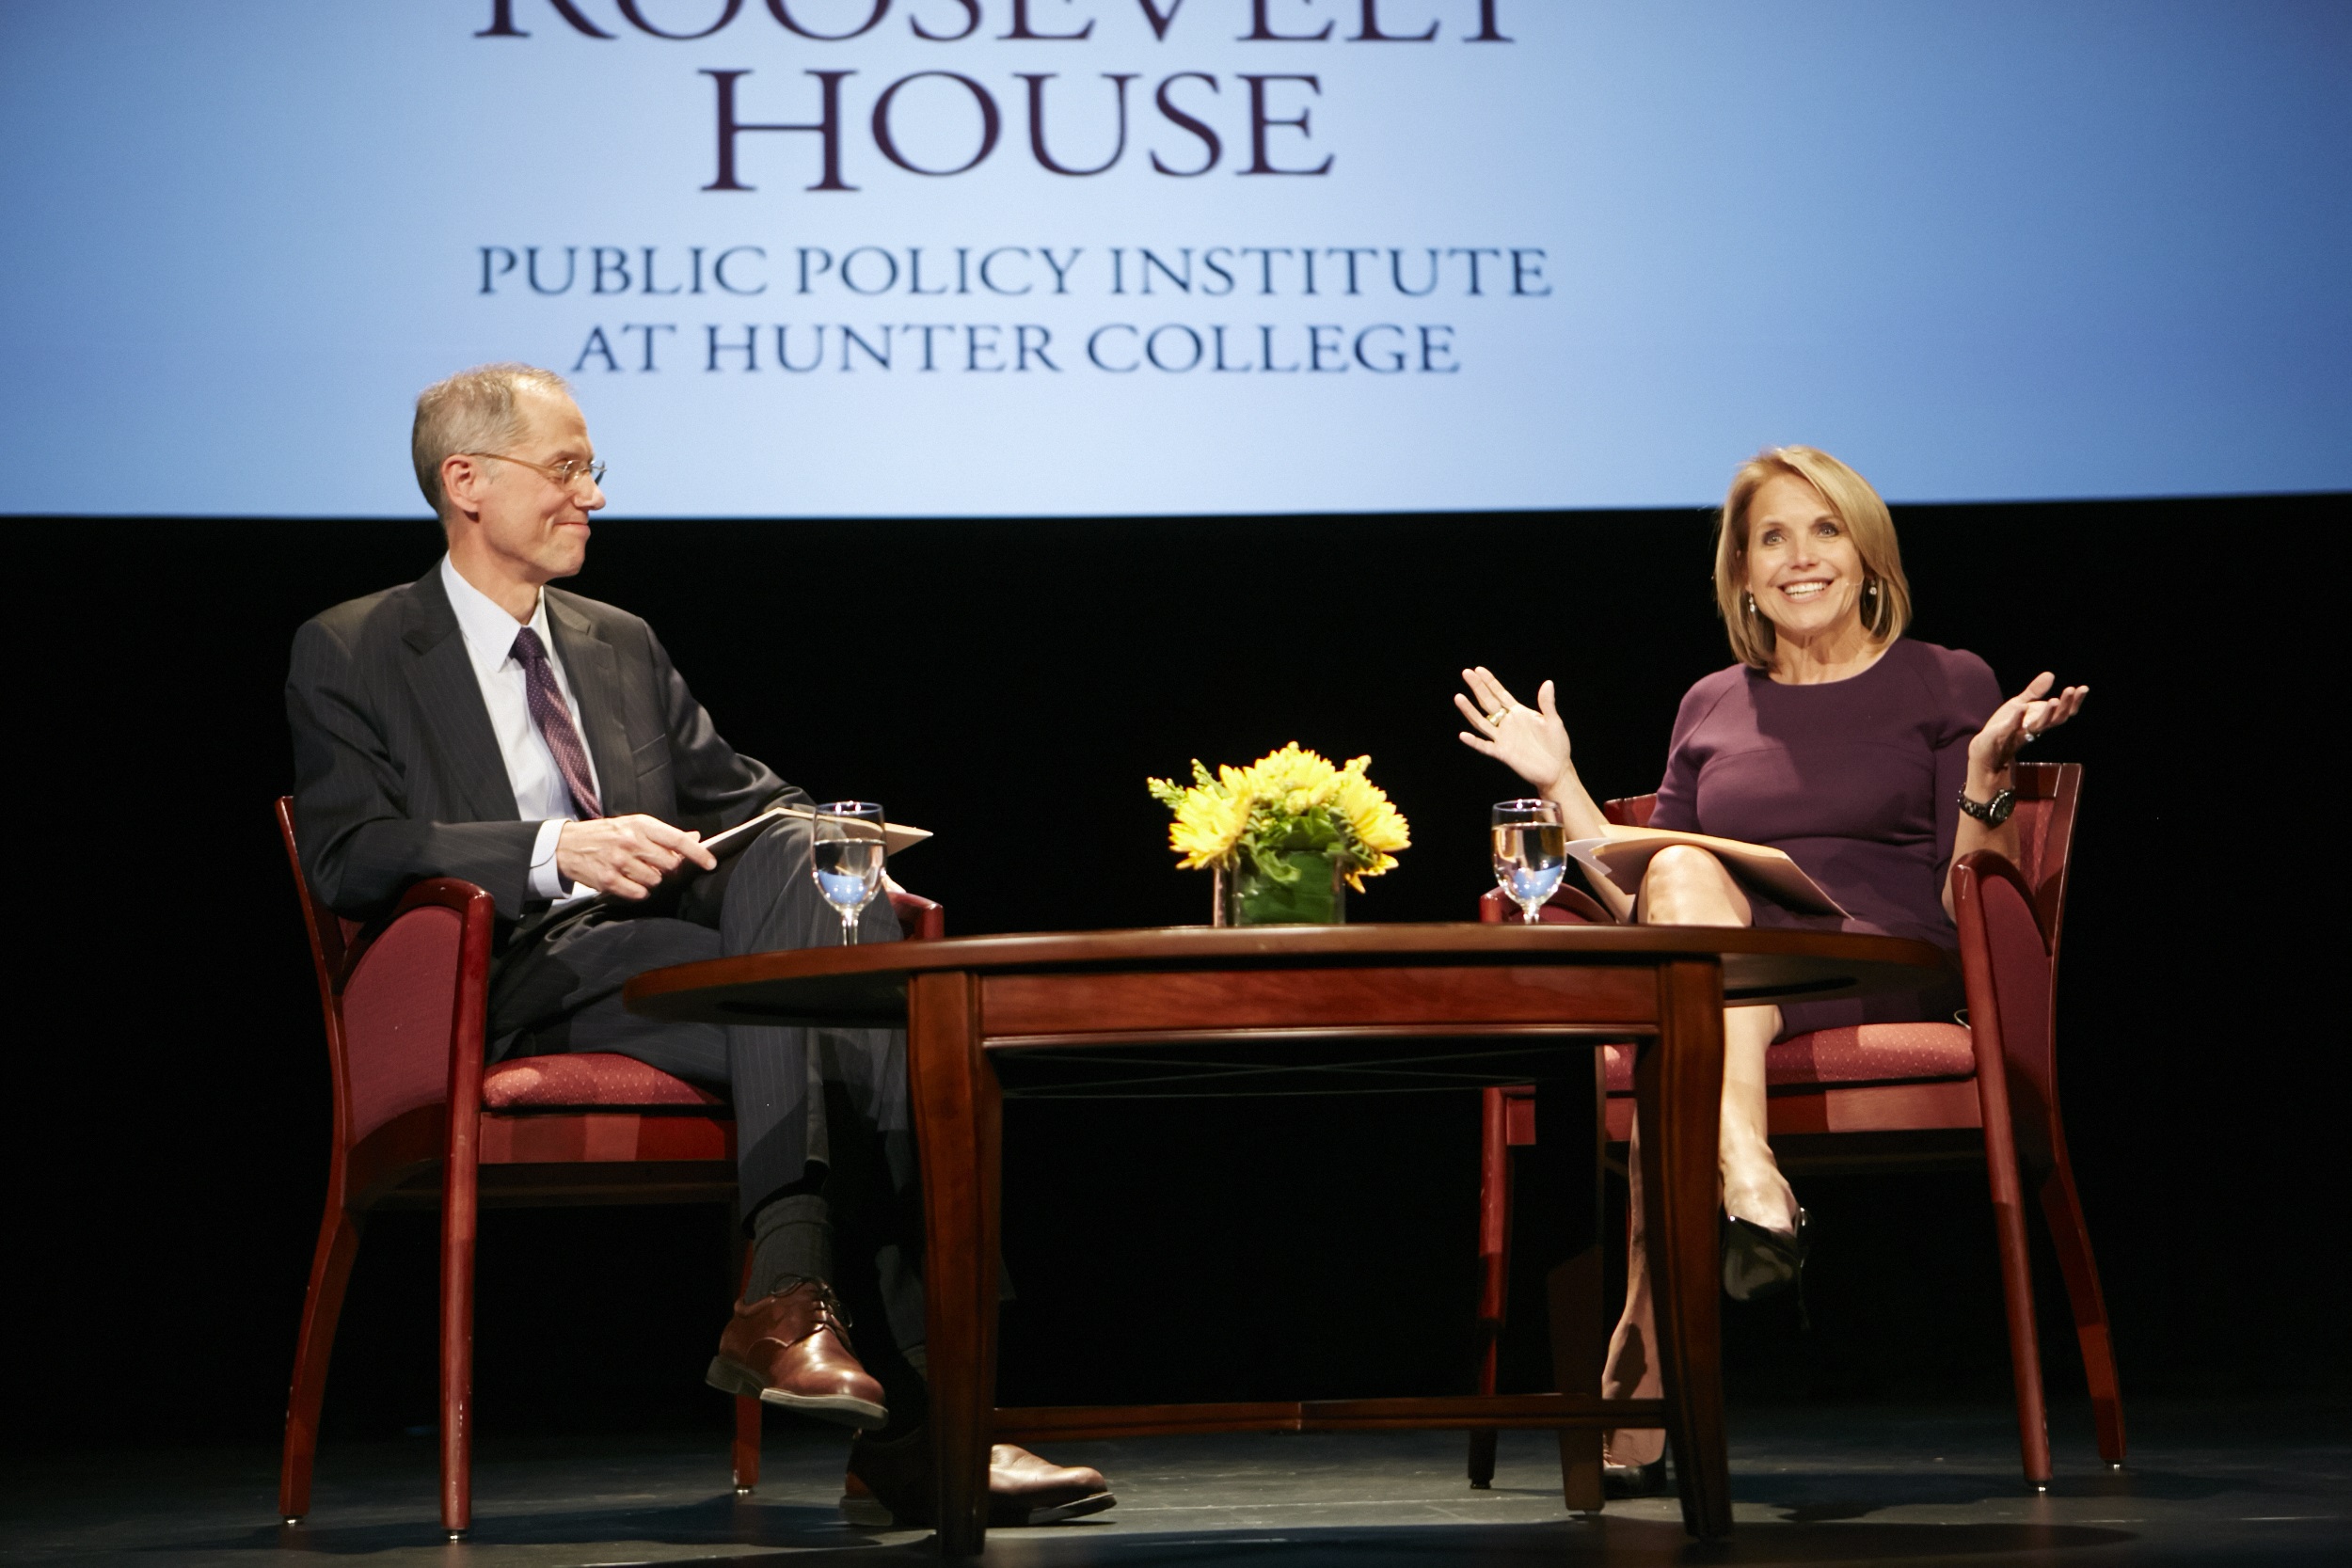 Roosevelt House Public Policy Institute